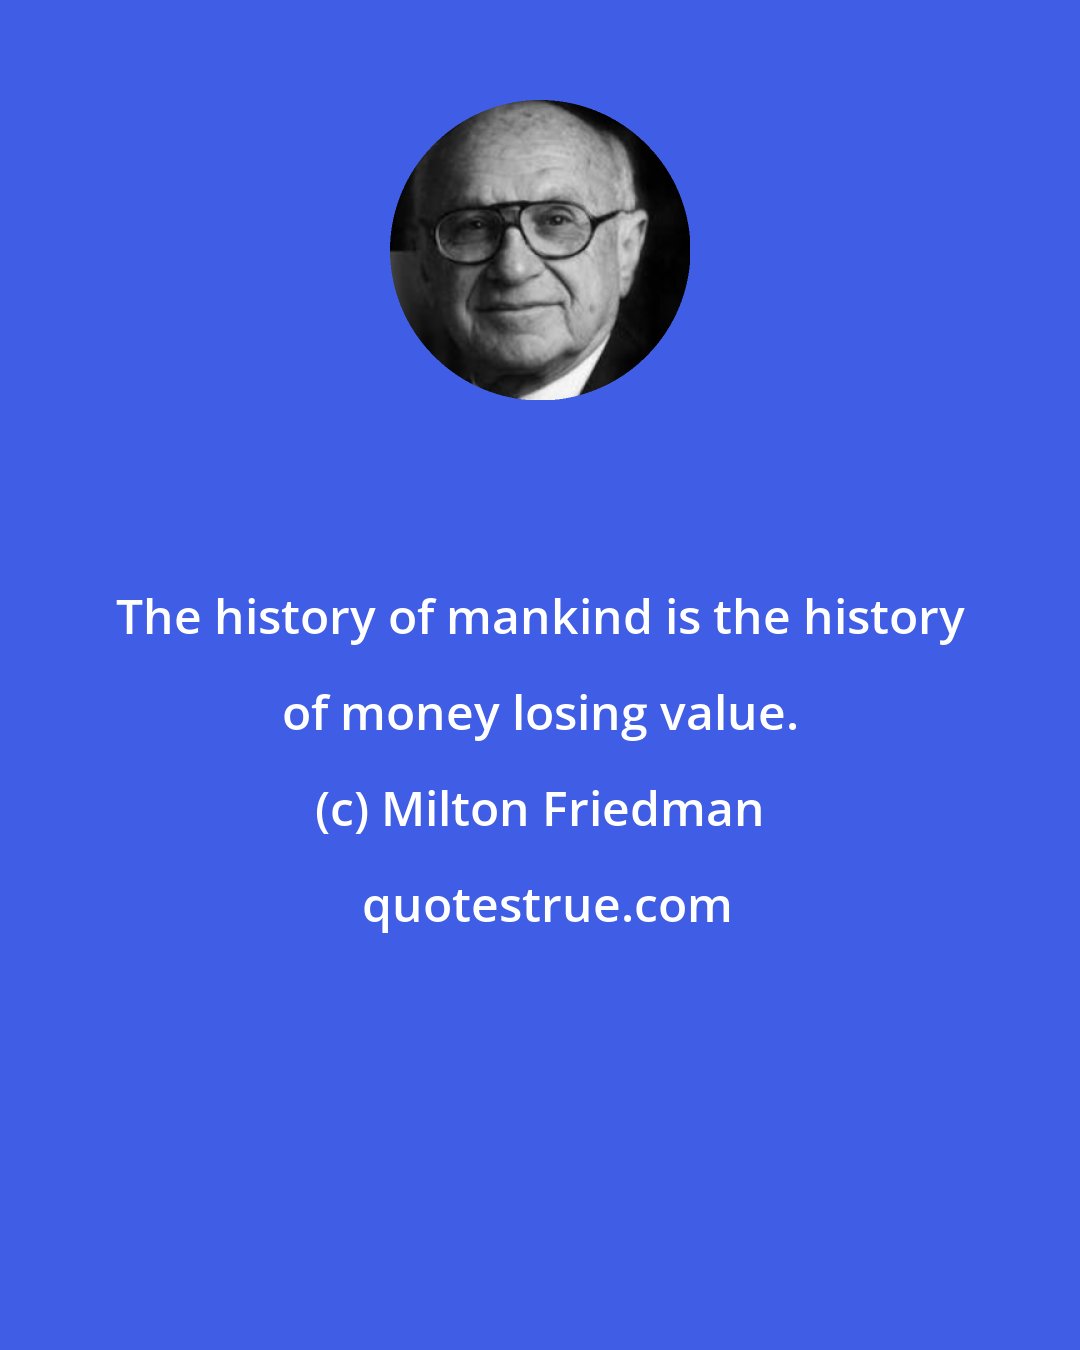 Milton Friedman: The history of mankind is the history of money losing value.